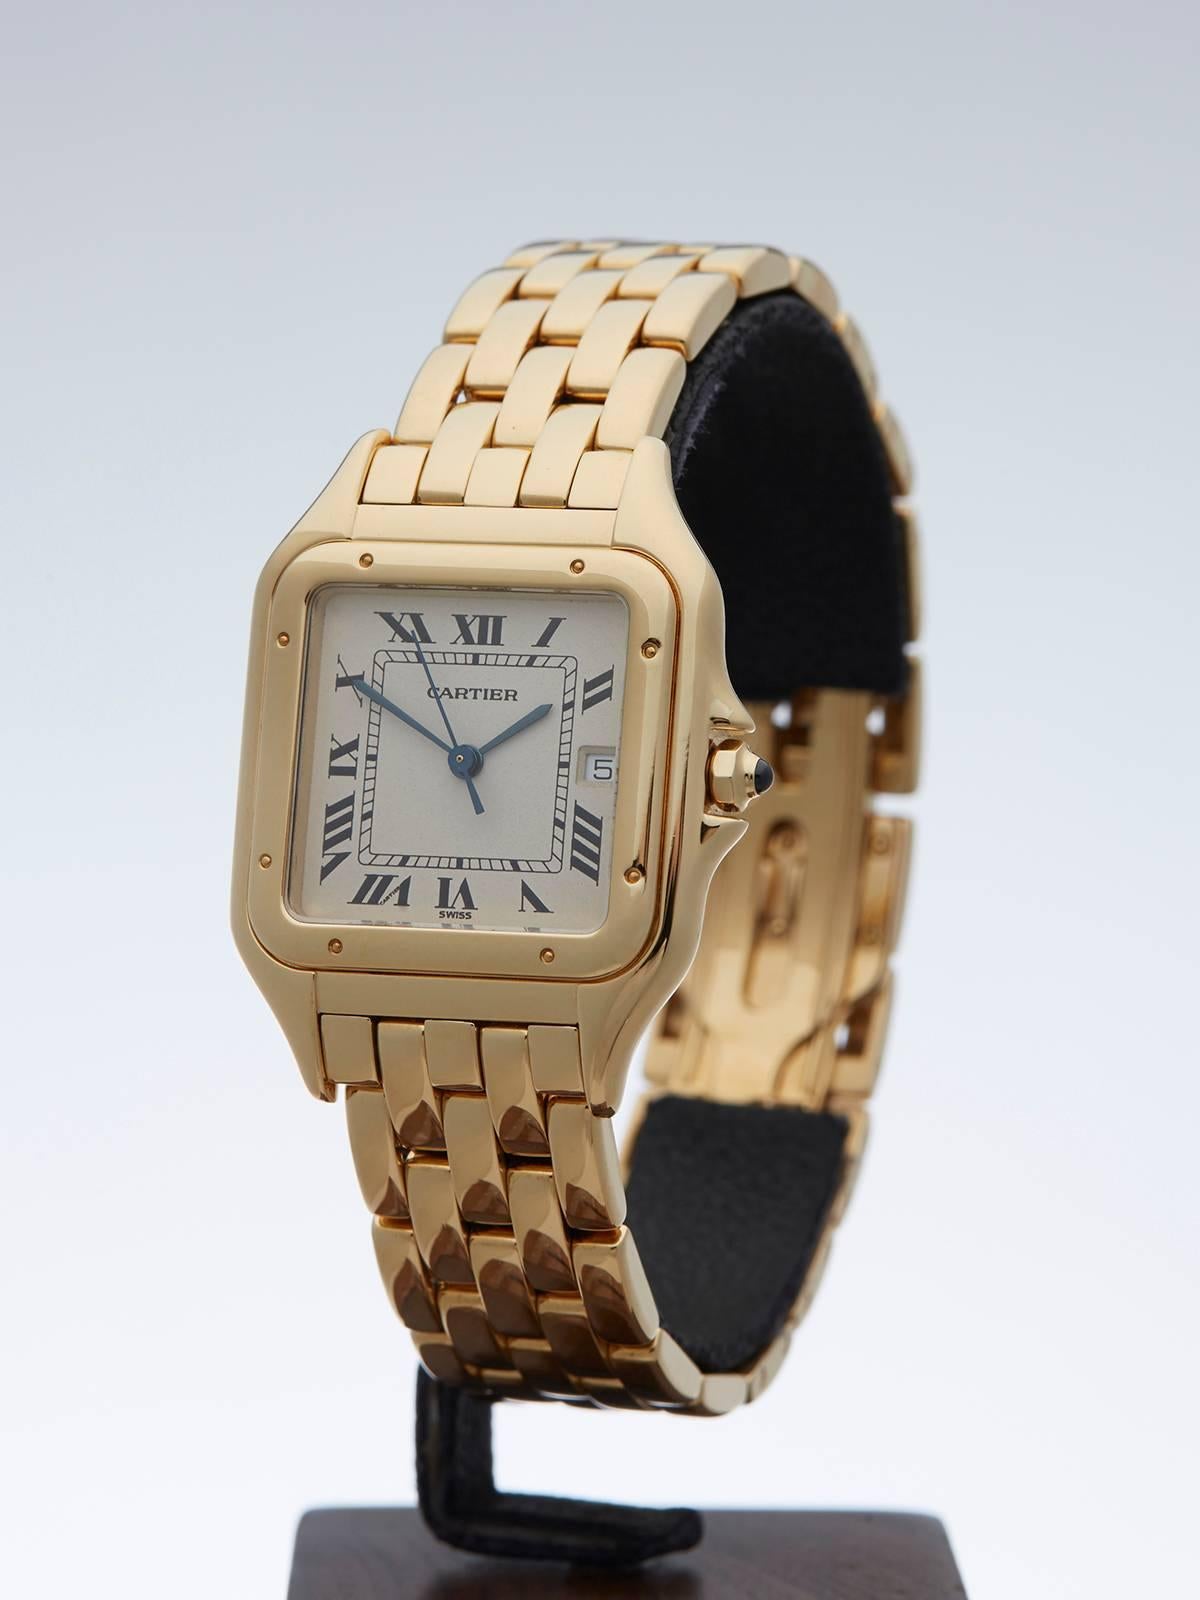 REF	W3383
MODEL NUMBER	W25014B9
SERIAL NUMBER	883*******
CONDITION	9 - Excellent condition
GENDER	Ladies
AGE	2000's
CASE DIAMETER	27 mm
CASE SIZE	27mm by 37mm
BOX & PAPERS	Xupes Presention Pouch
MOVEMENT	Quartz
CASE	18k Yellow